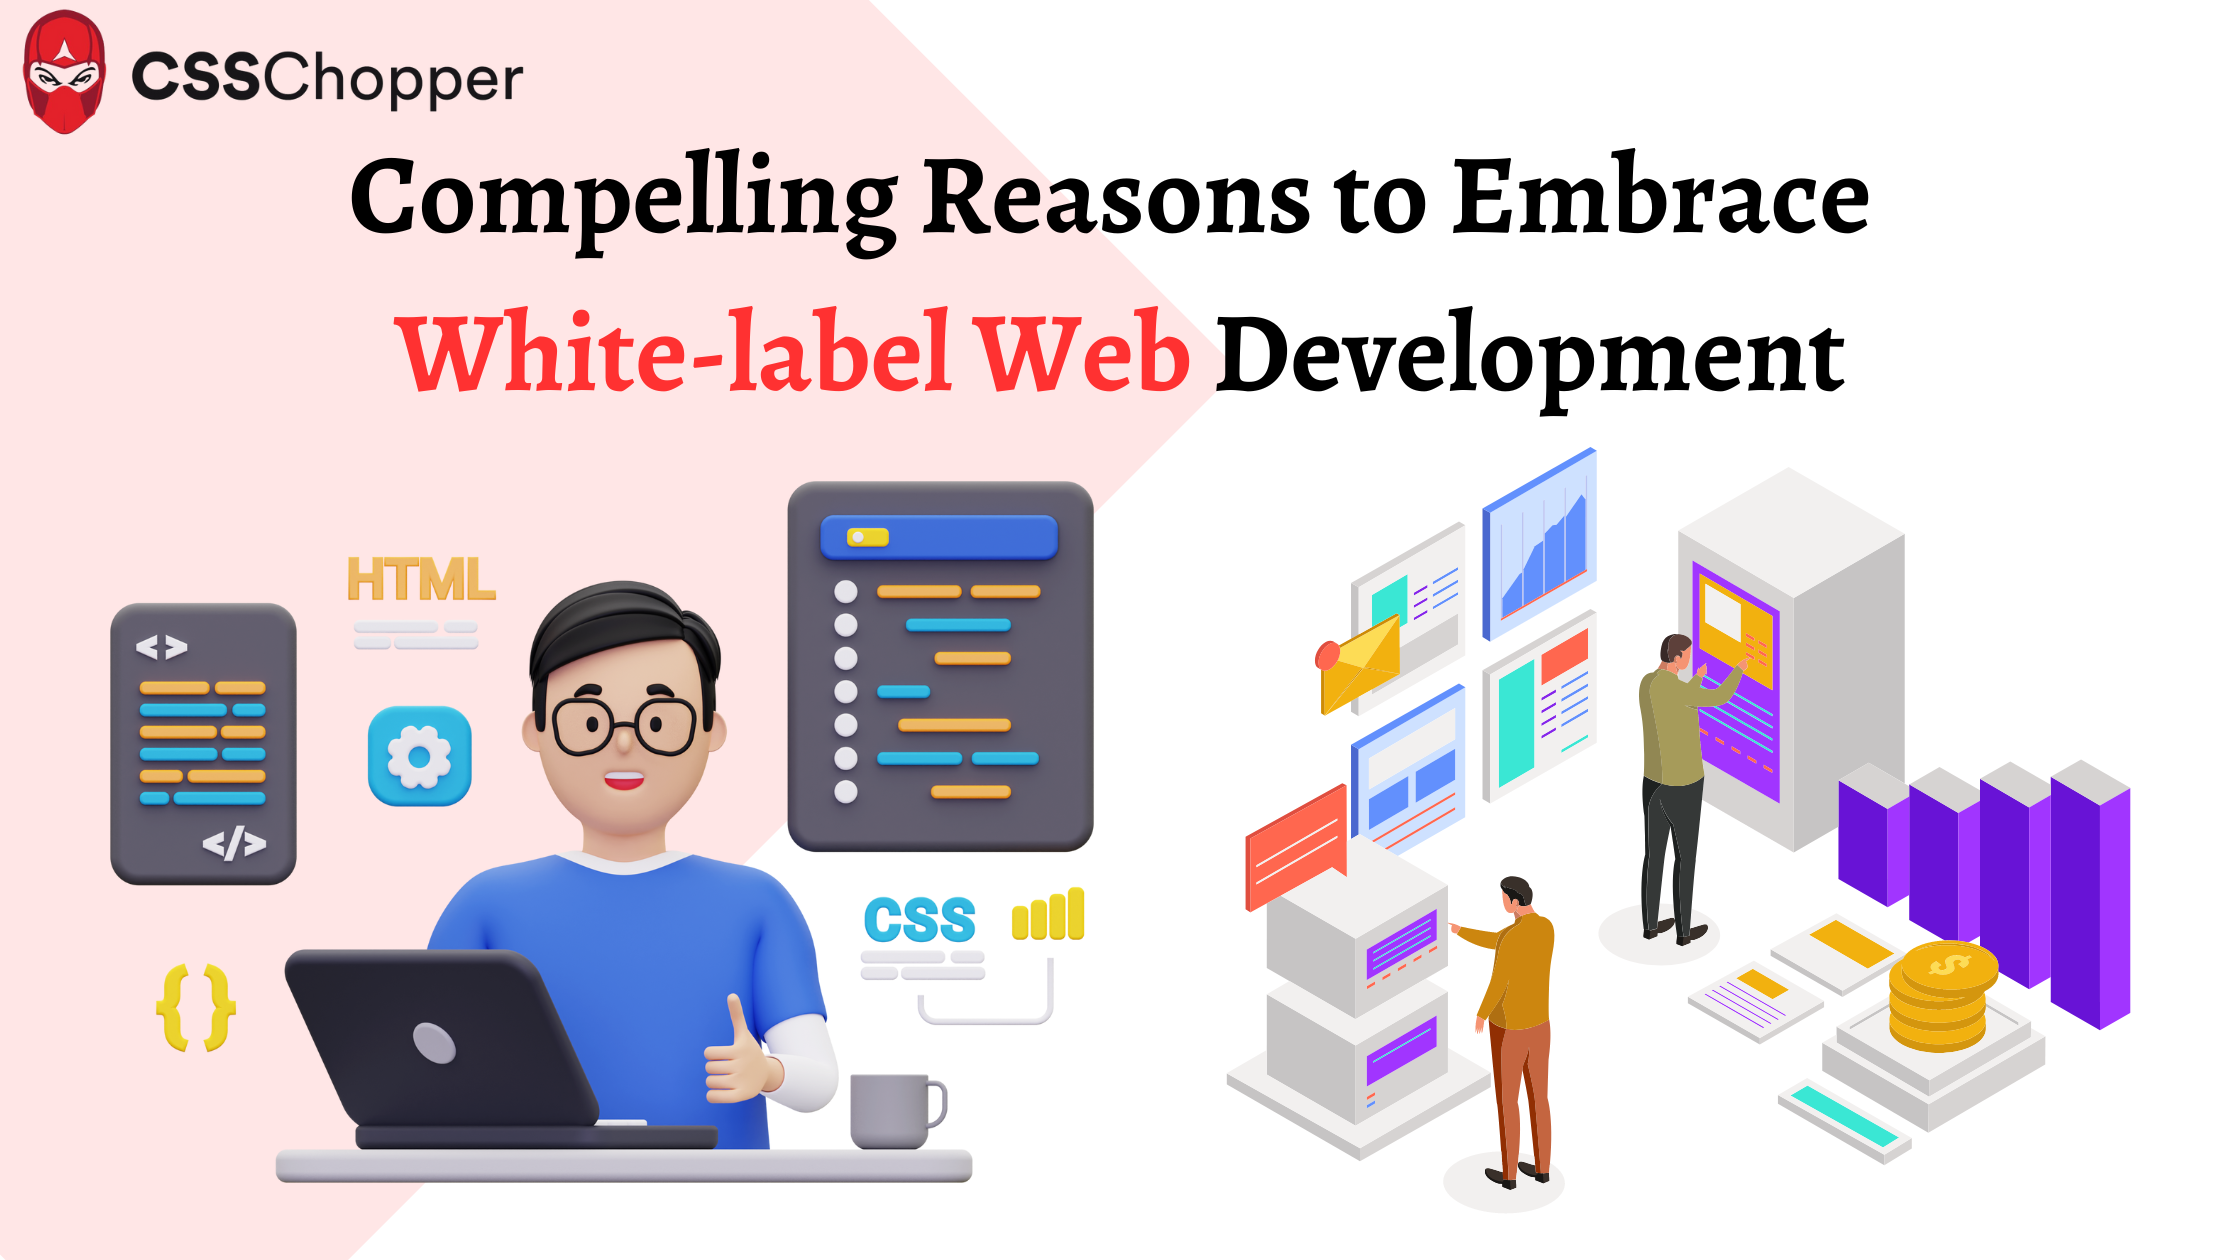 10 Compelling Reasons to Embrace White-label Web Development for Your Agency